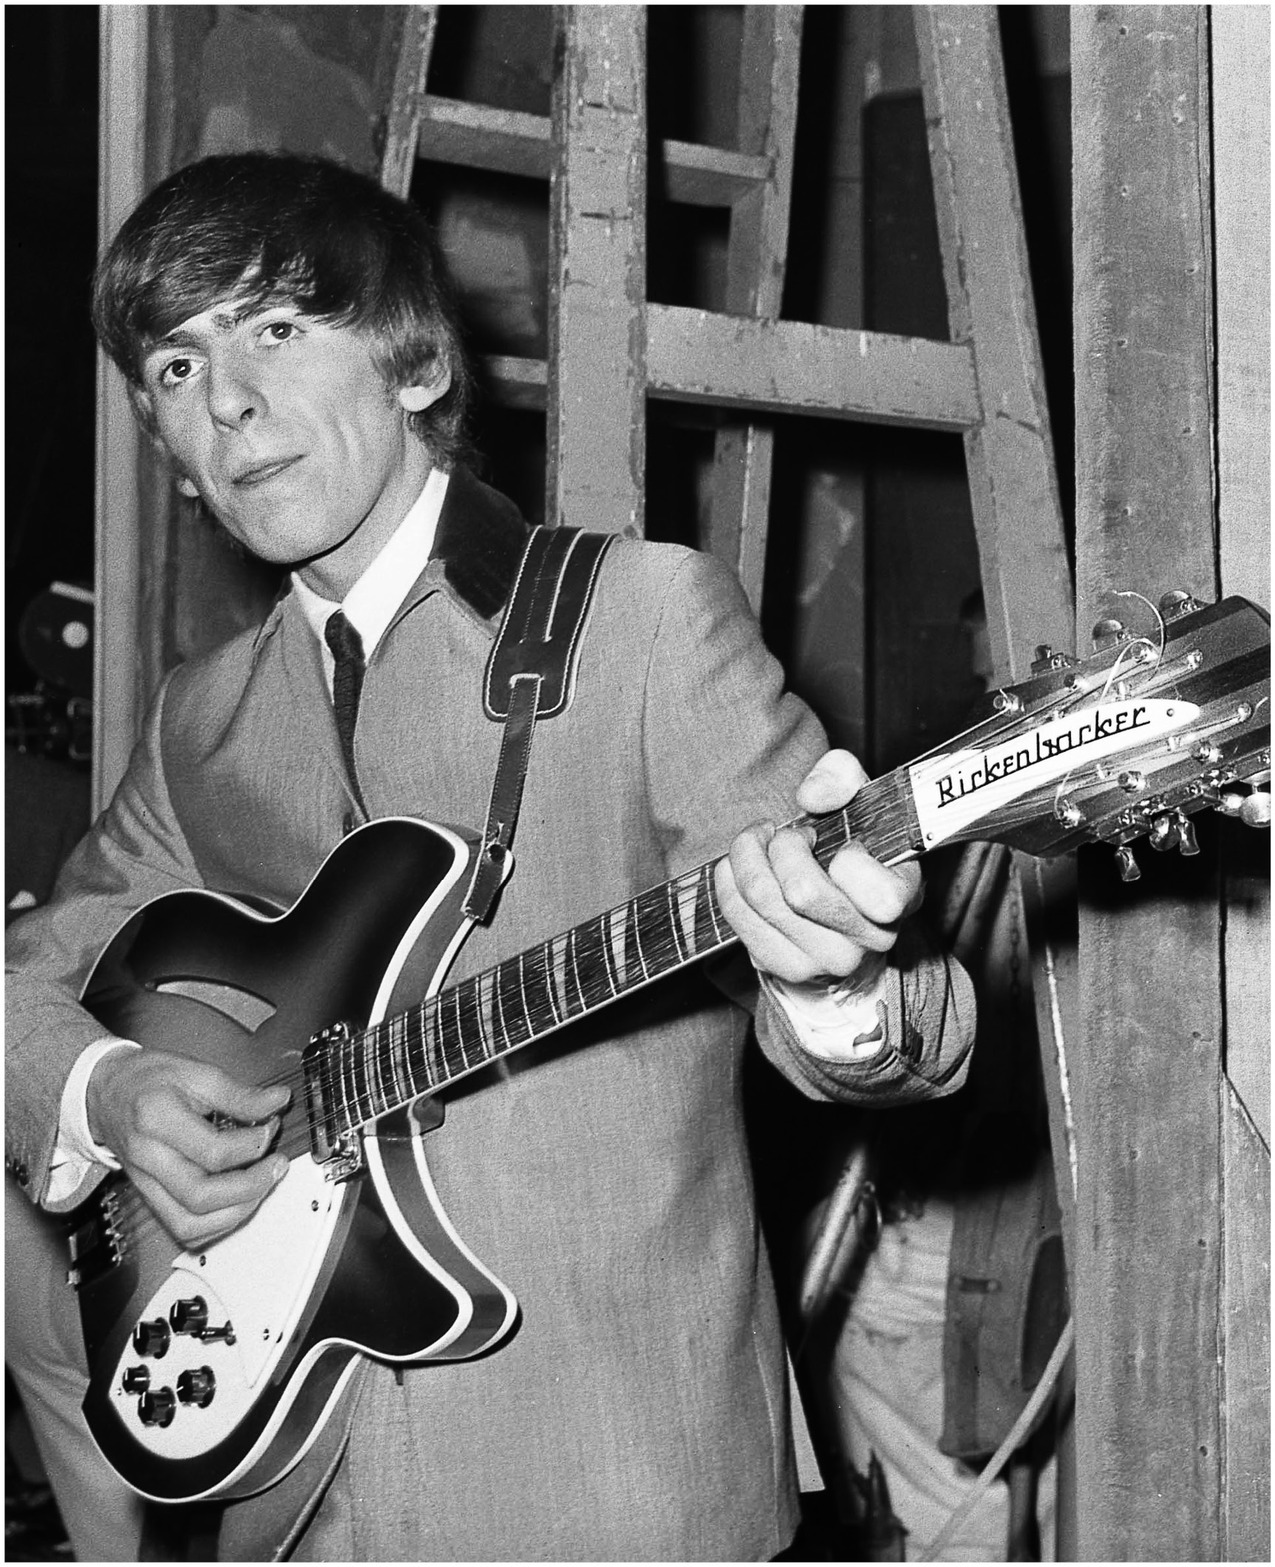 UNITED KINGDOM - MARCH 01:  Photo of George HARRISON and BEATLES; George Harrison (with Rickenbacker 360/12 guitar), posed on the set of 'A Hard Day's Night' at the Scala Theatre  (Photo by K & K Ulf Kruger OHG/Redferns)